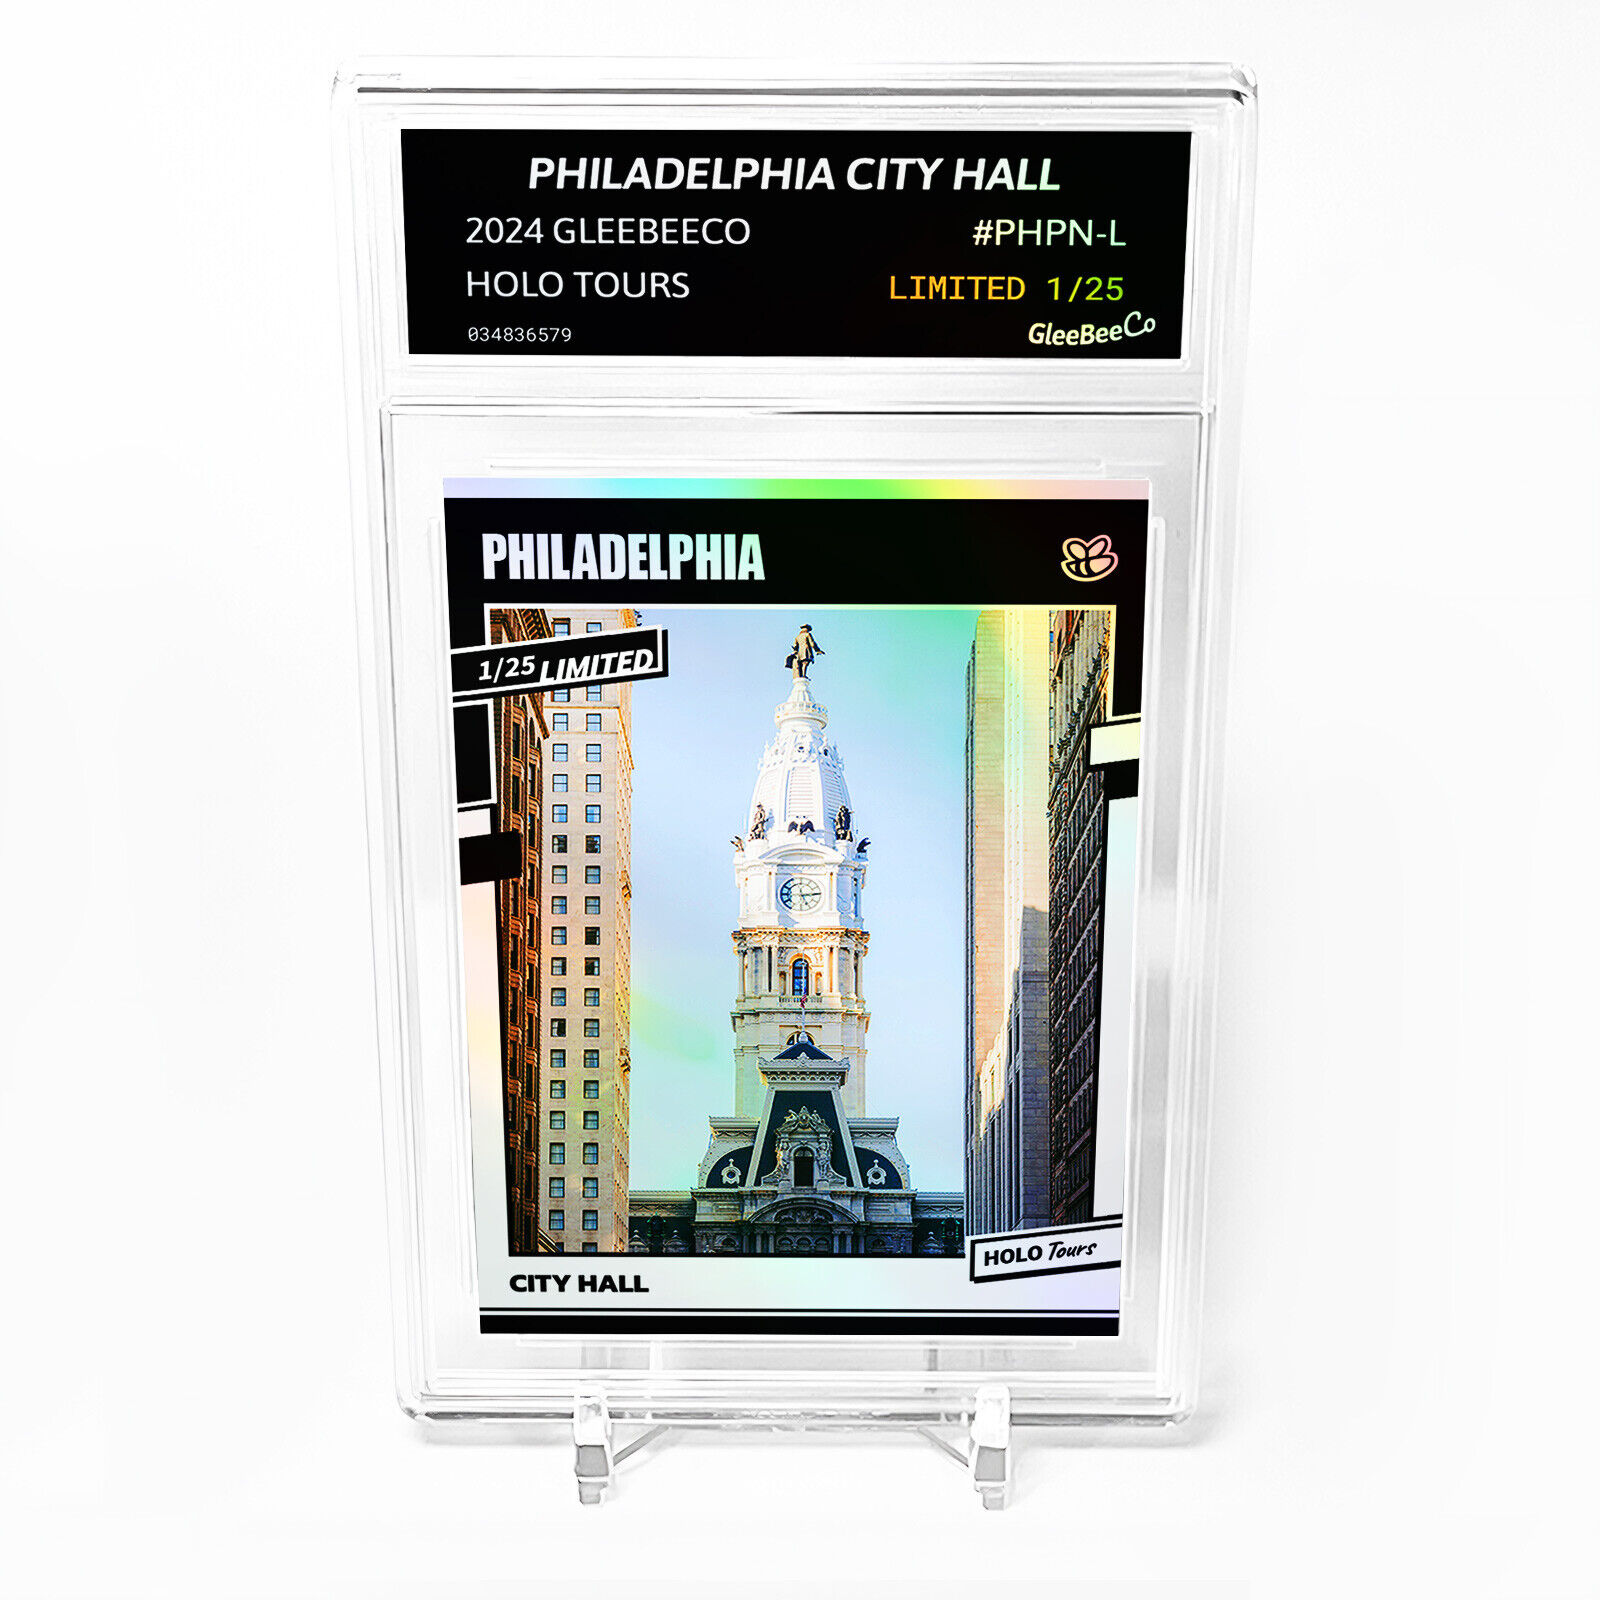 PHILADELPHIA CITY HALL Card 2024 GleeBeeCo Holo Tours Slabbed #PHPN-L Only /25